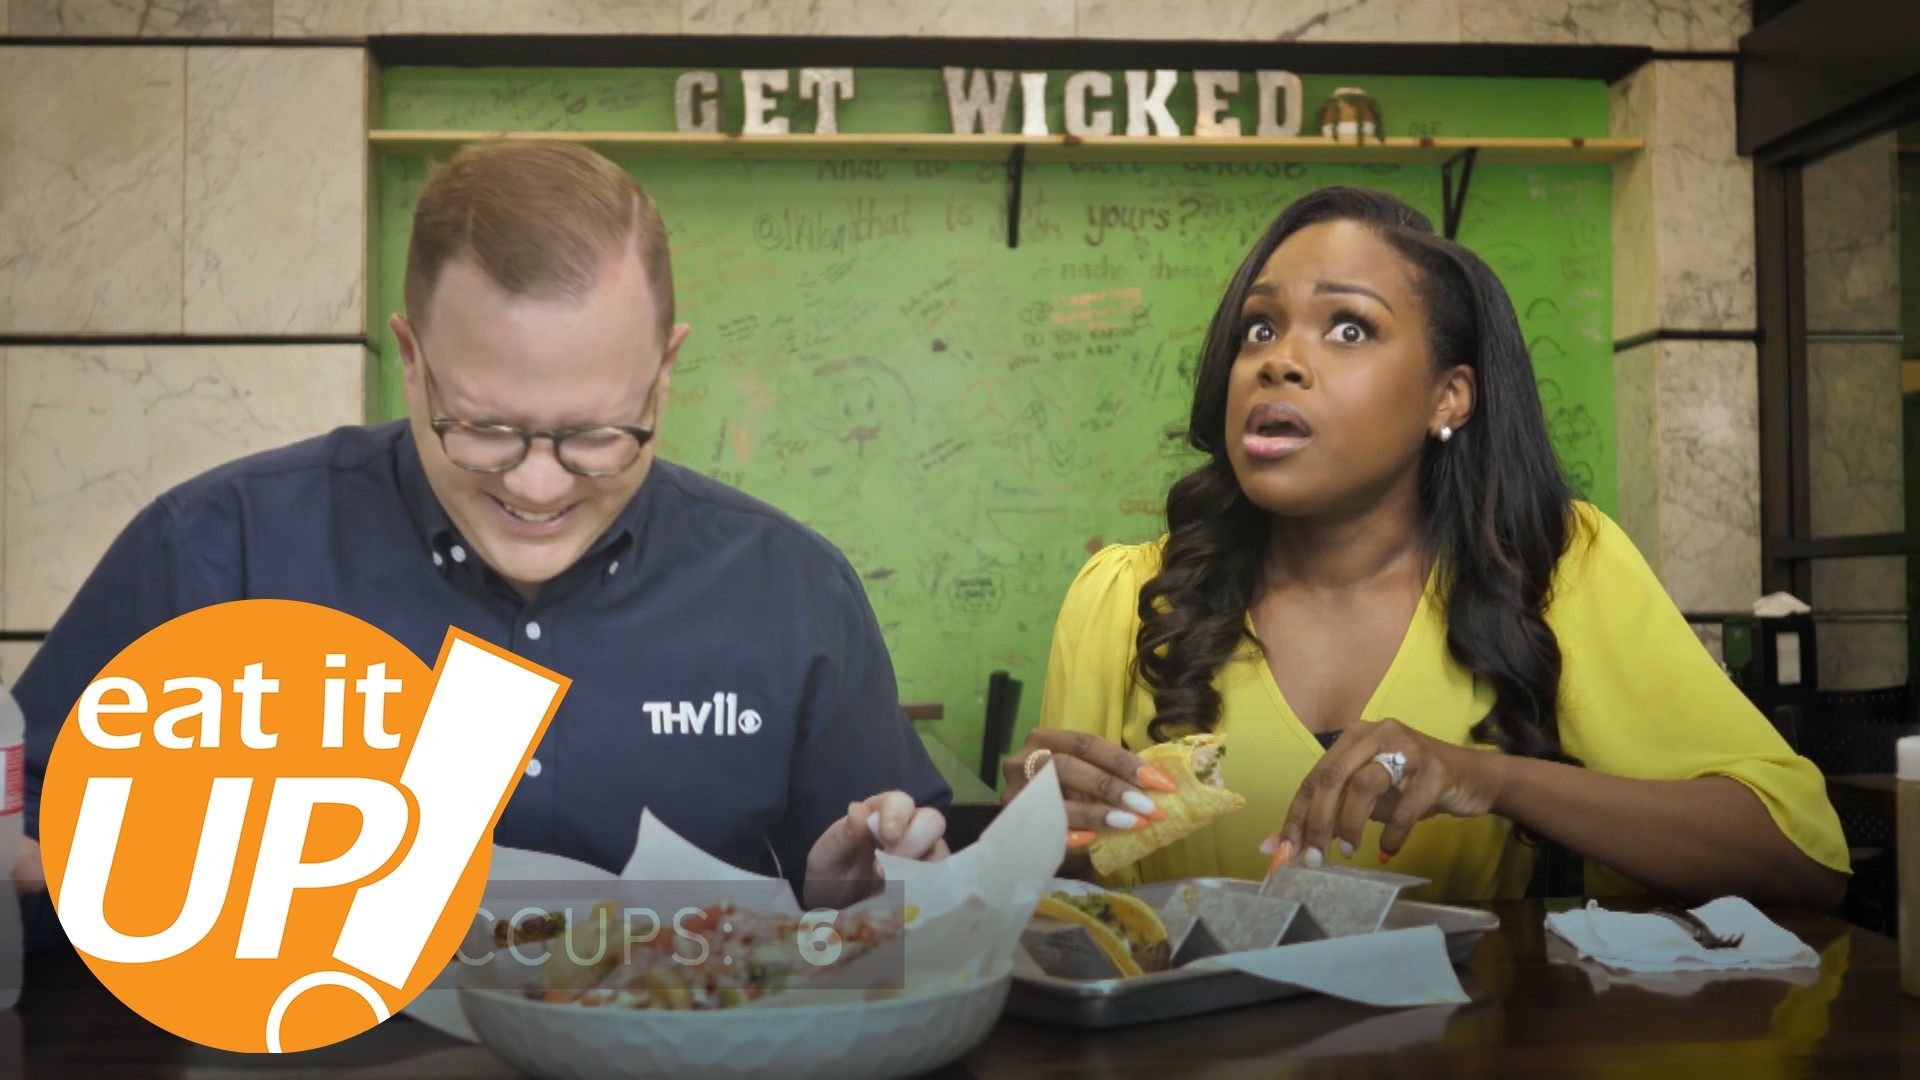 Things get 'wicked' in this week's "eat it up" at wicked taco. THV11's very own Marlisa Goldsmith is showing Skot her must-haves, at one of her favorite local spots.